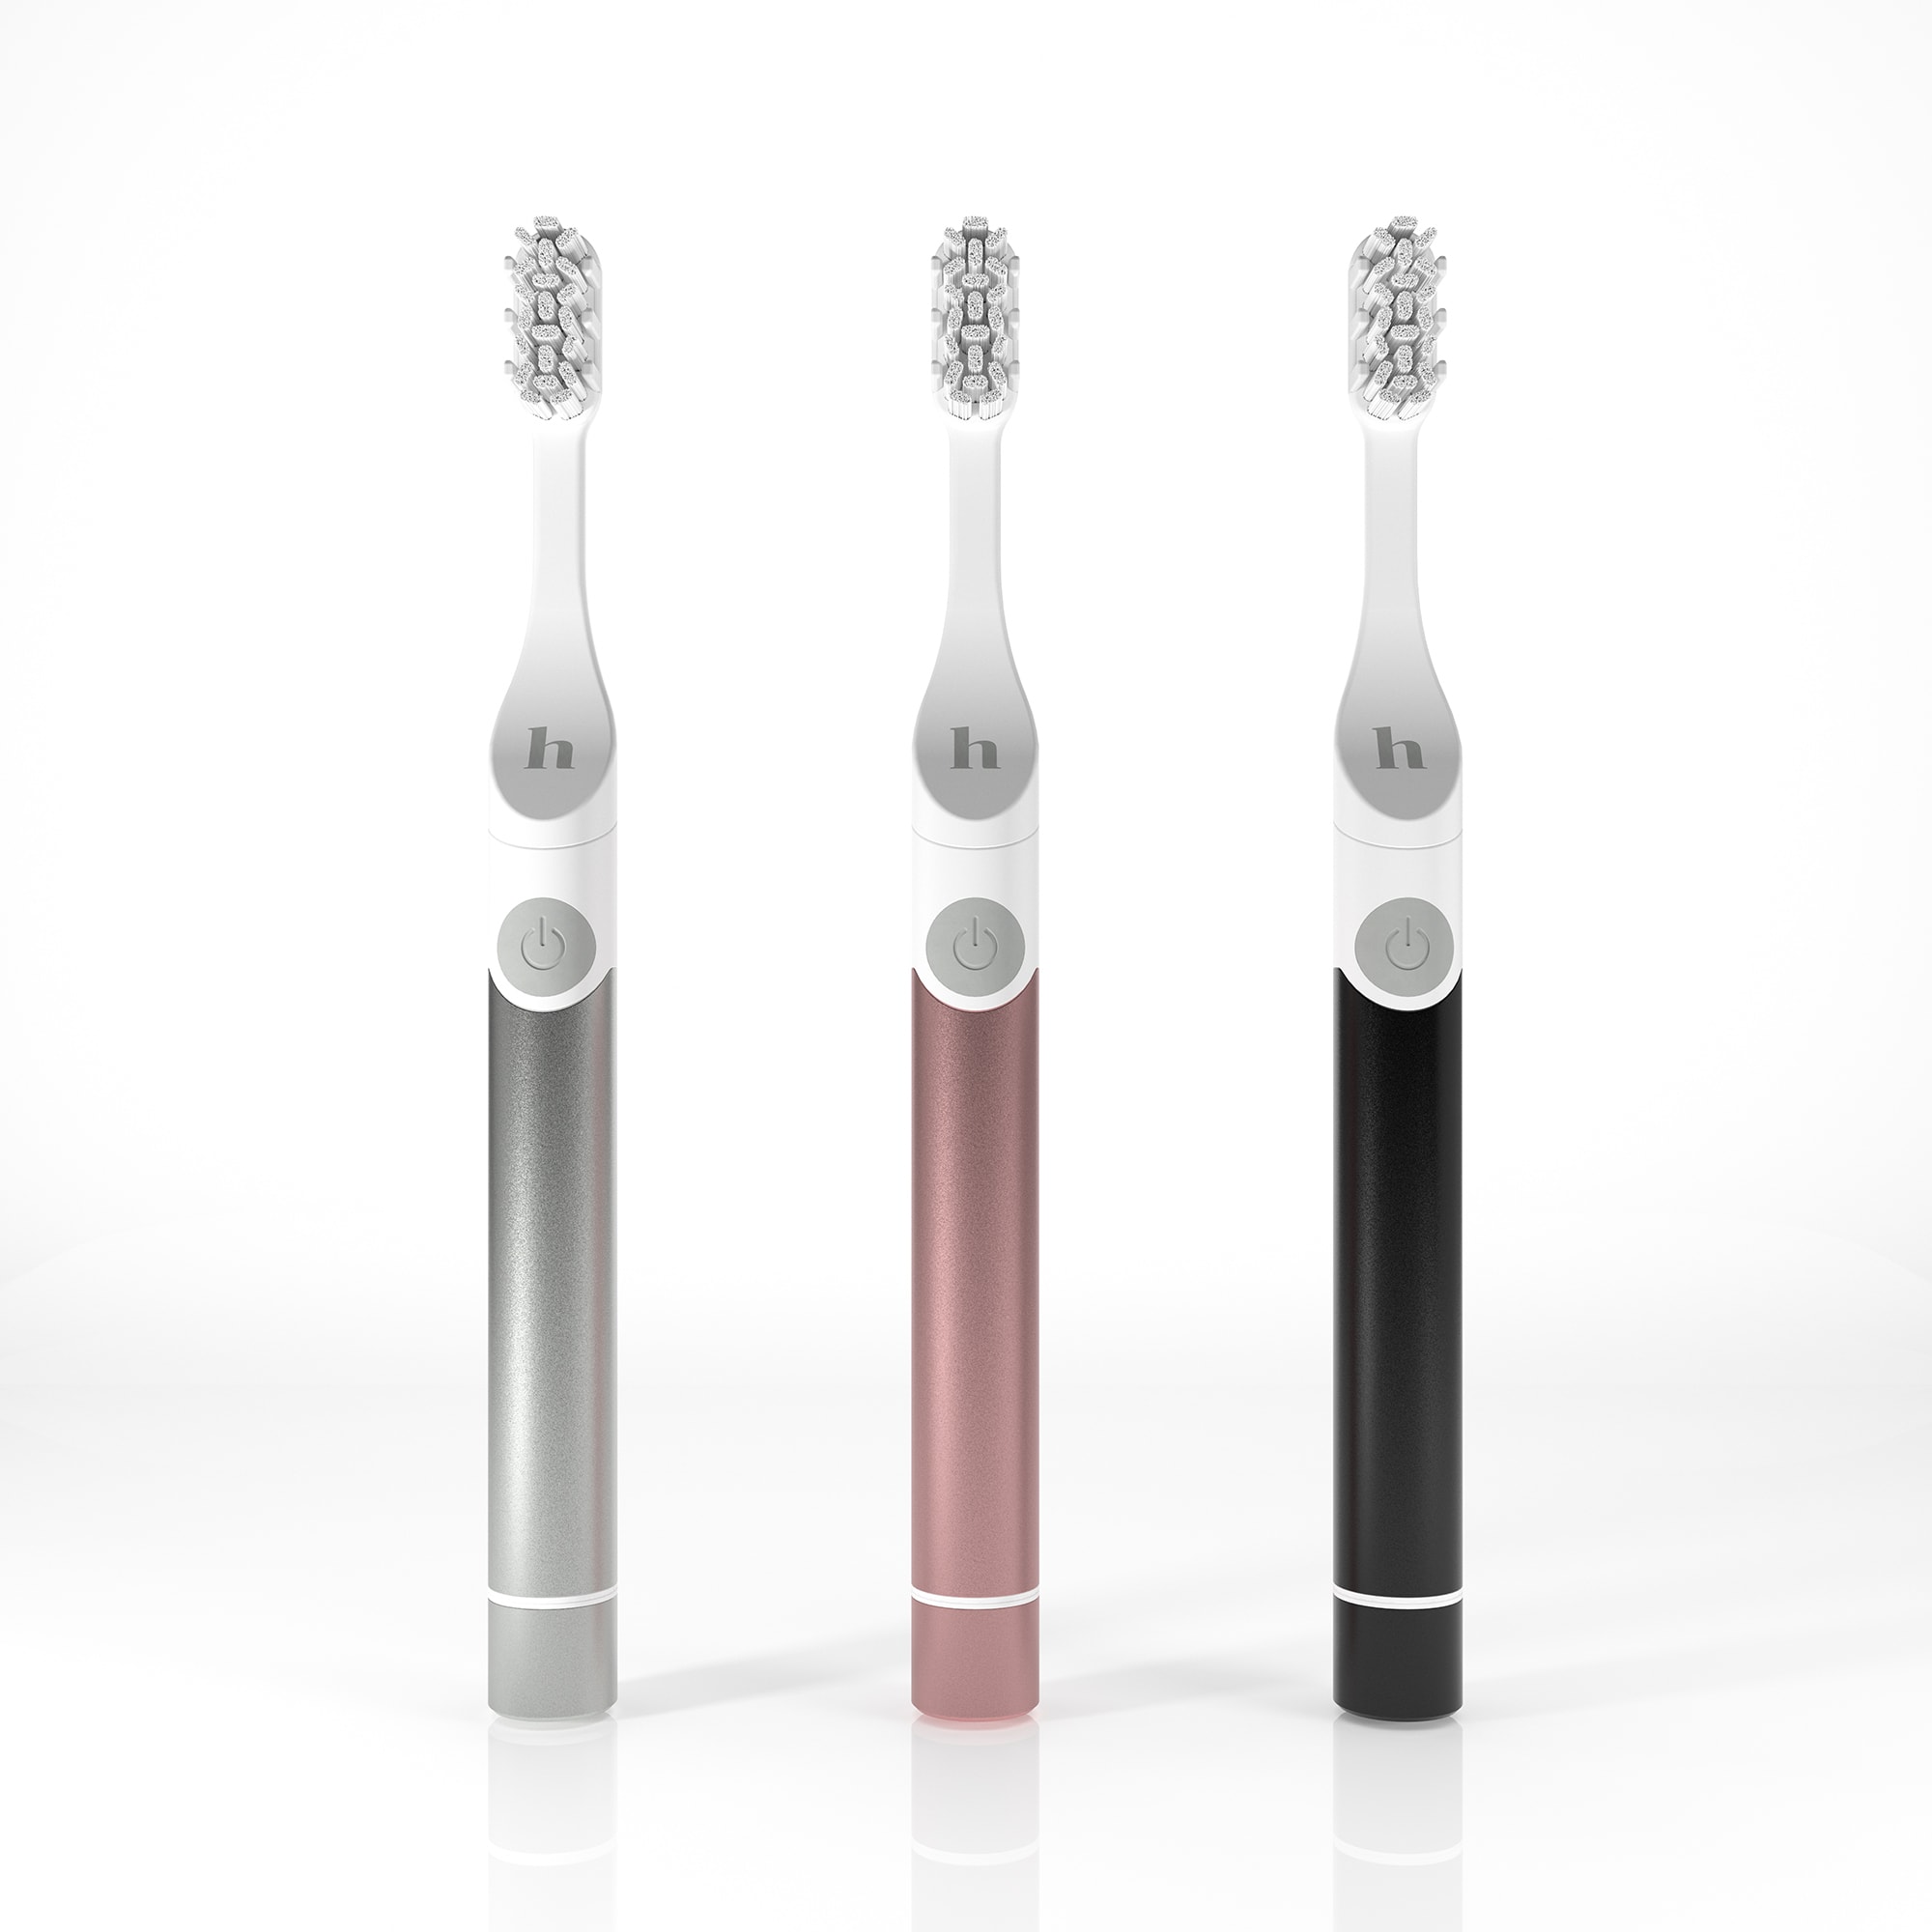 A product visualization of an electric toothbrush